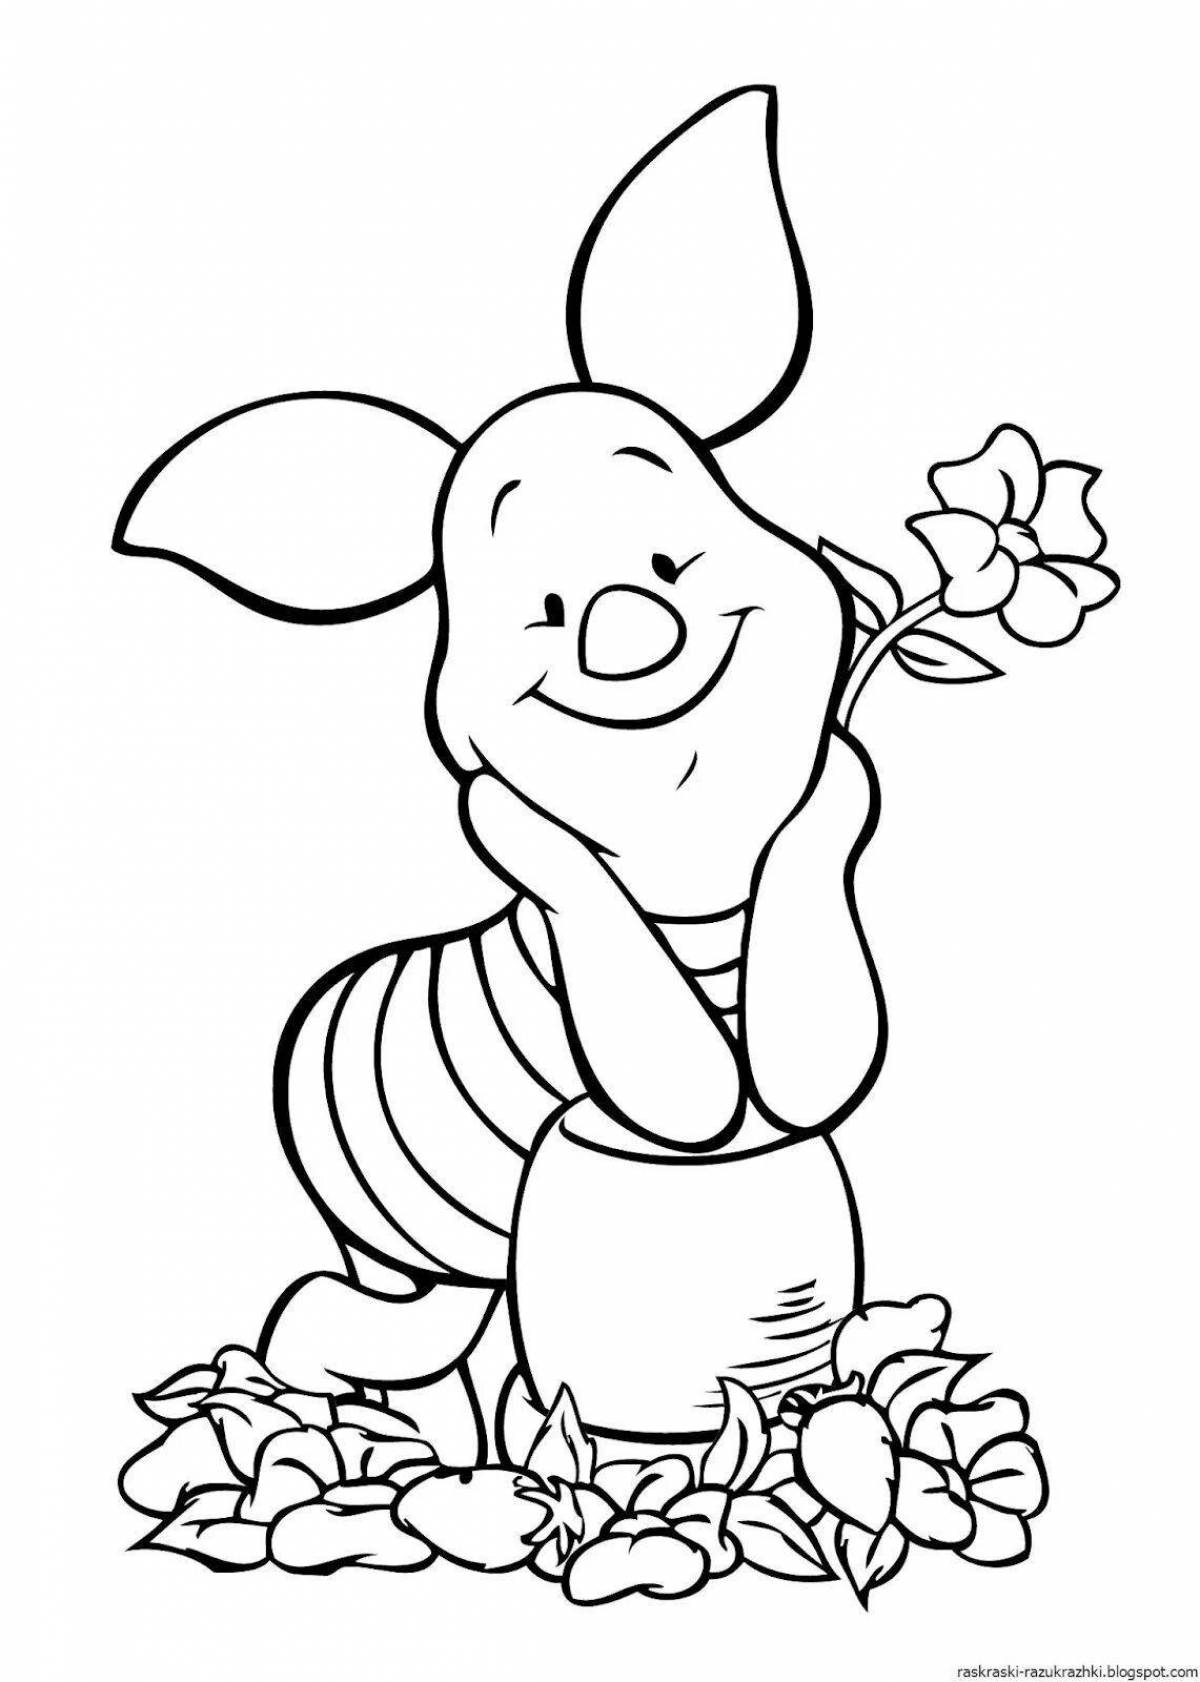 Gorgeous cartoon characters coloring book for 4-5 year olds